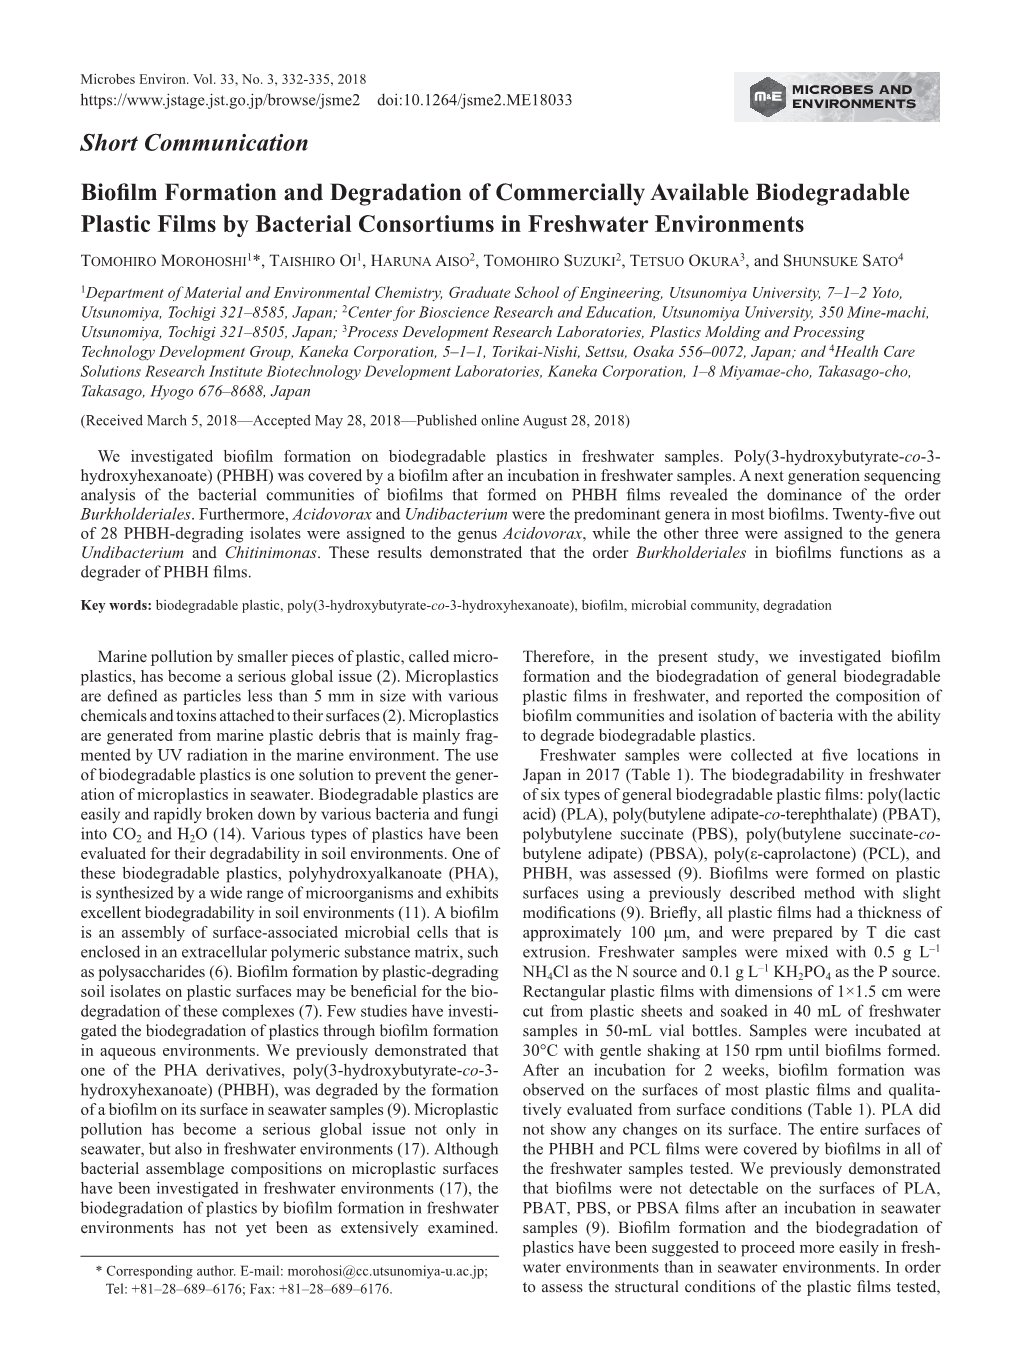 Short Communication Biofilm Formation and Degradation of Commercially Available Biodegradable Plastic Films by Bacterial Consortiums in Freshwater Environments